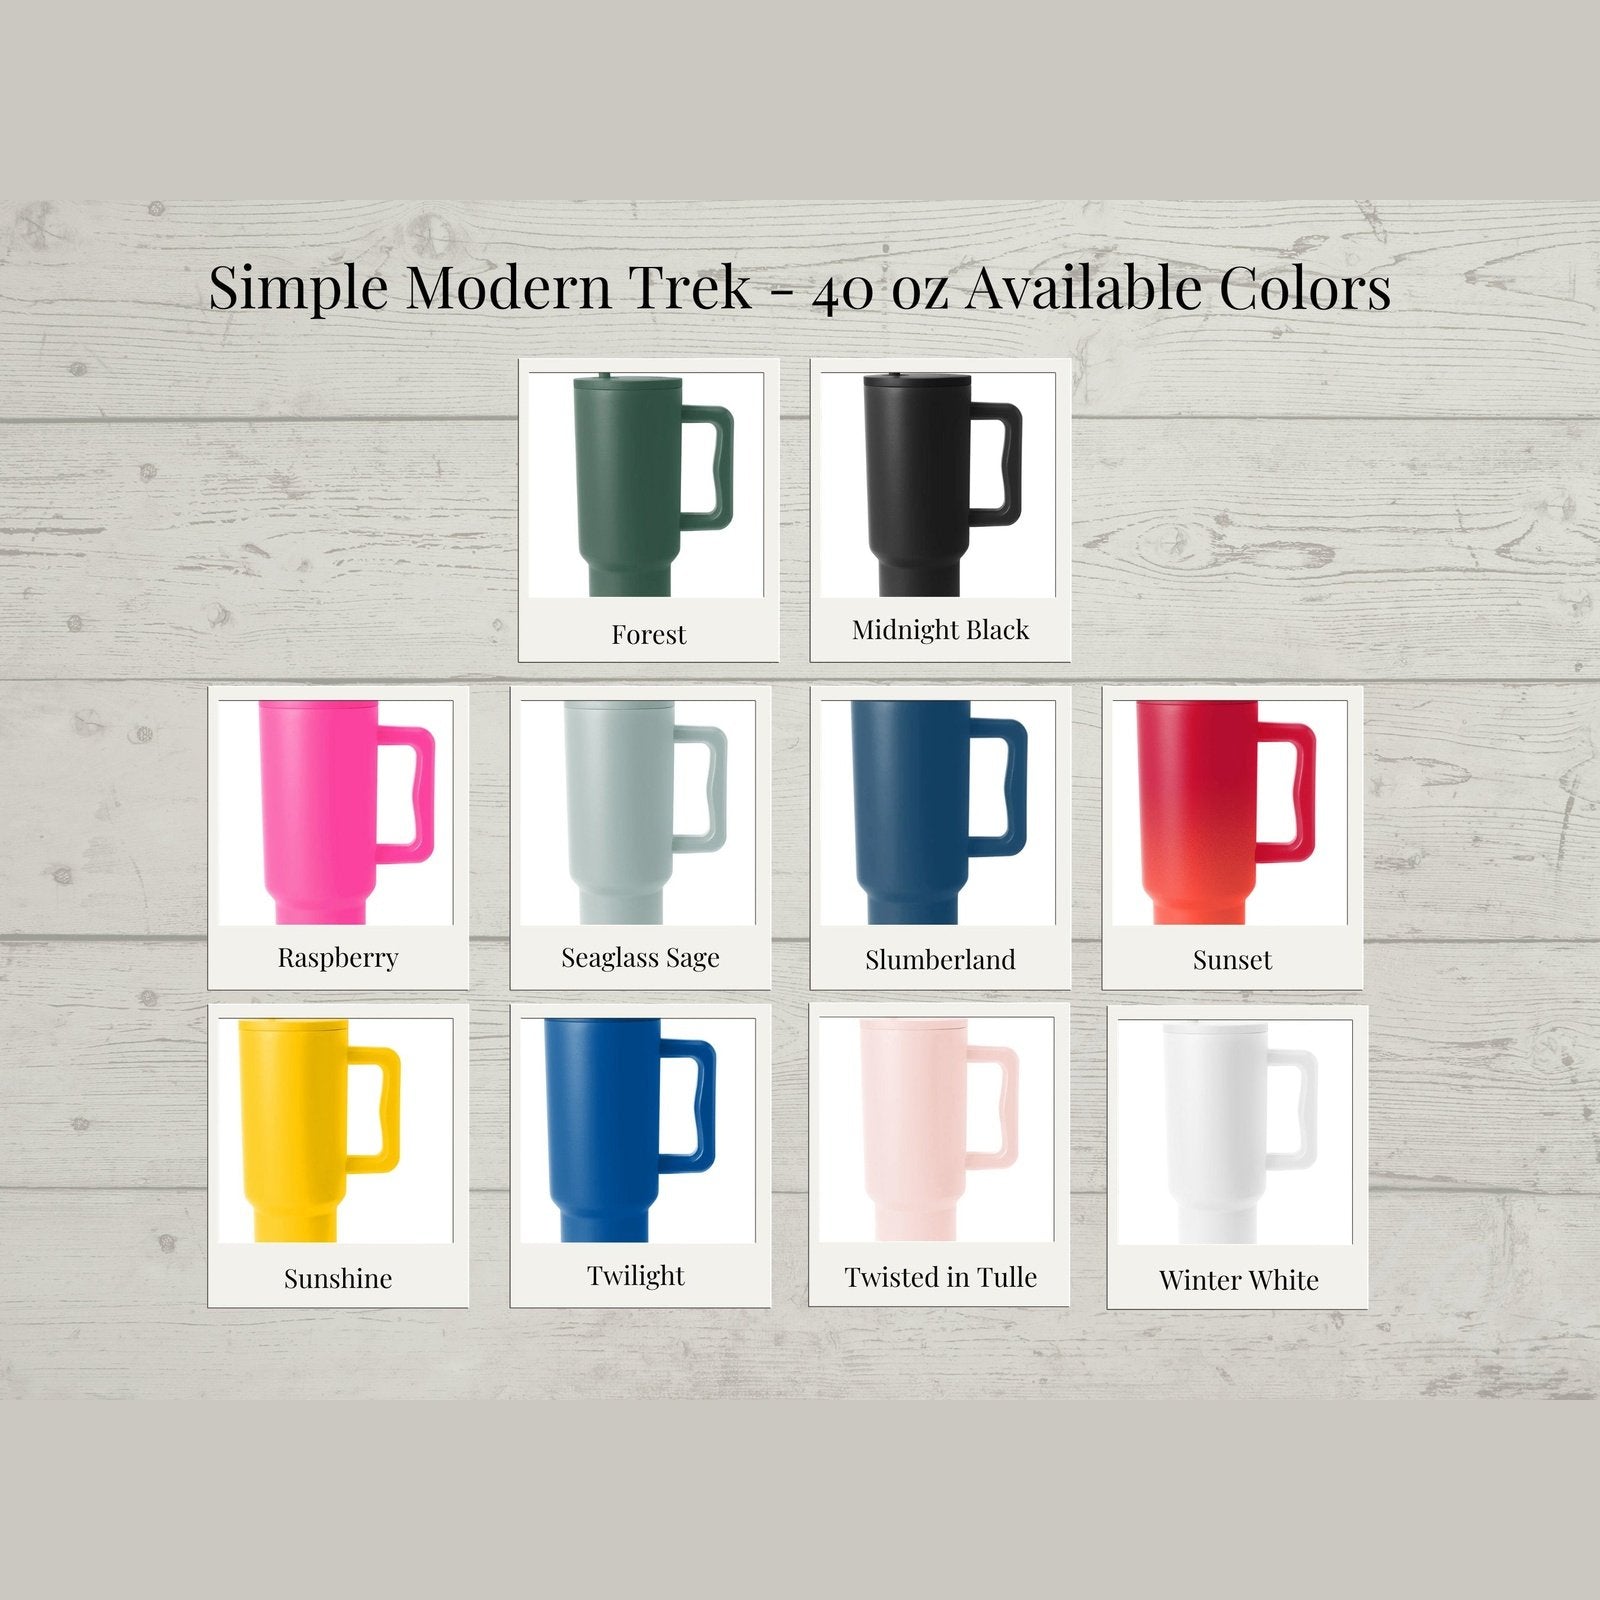 Simple Modern: New Colors Arrived for Our 40oz Trek Tumbler!